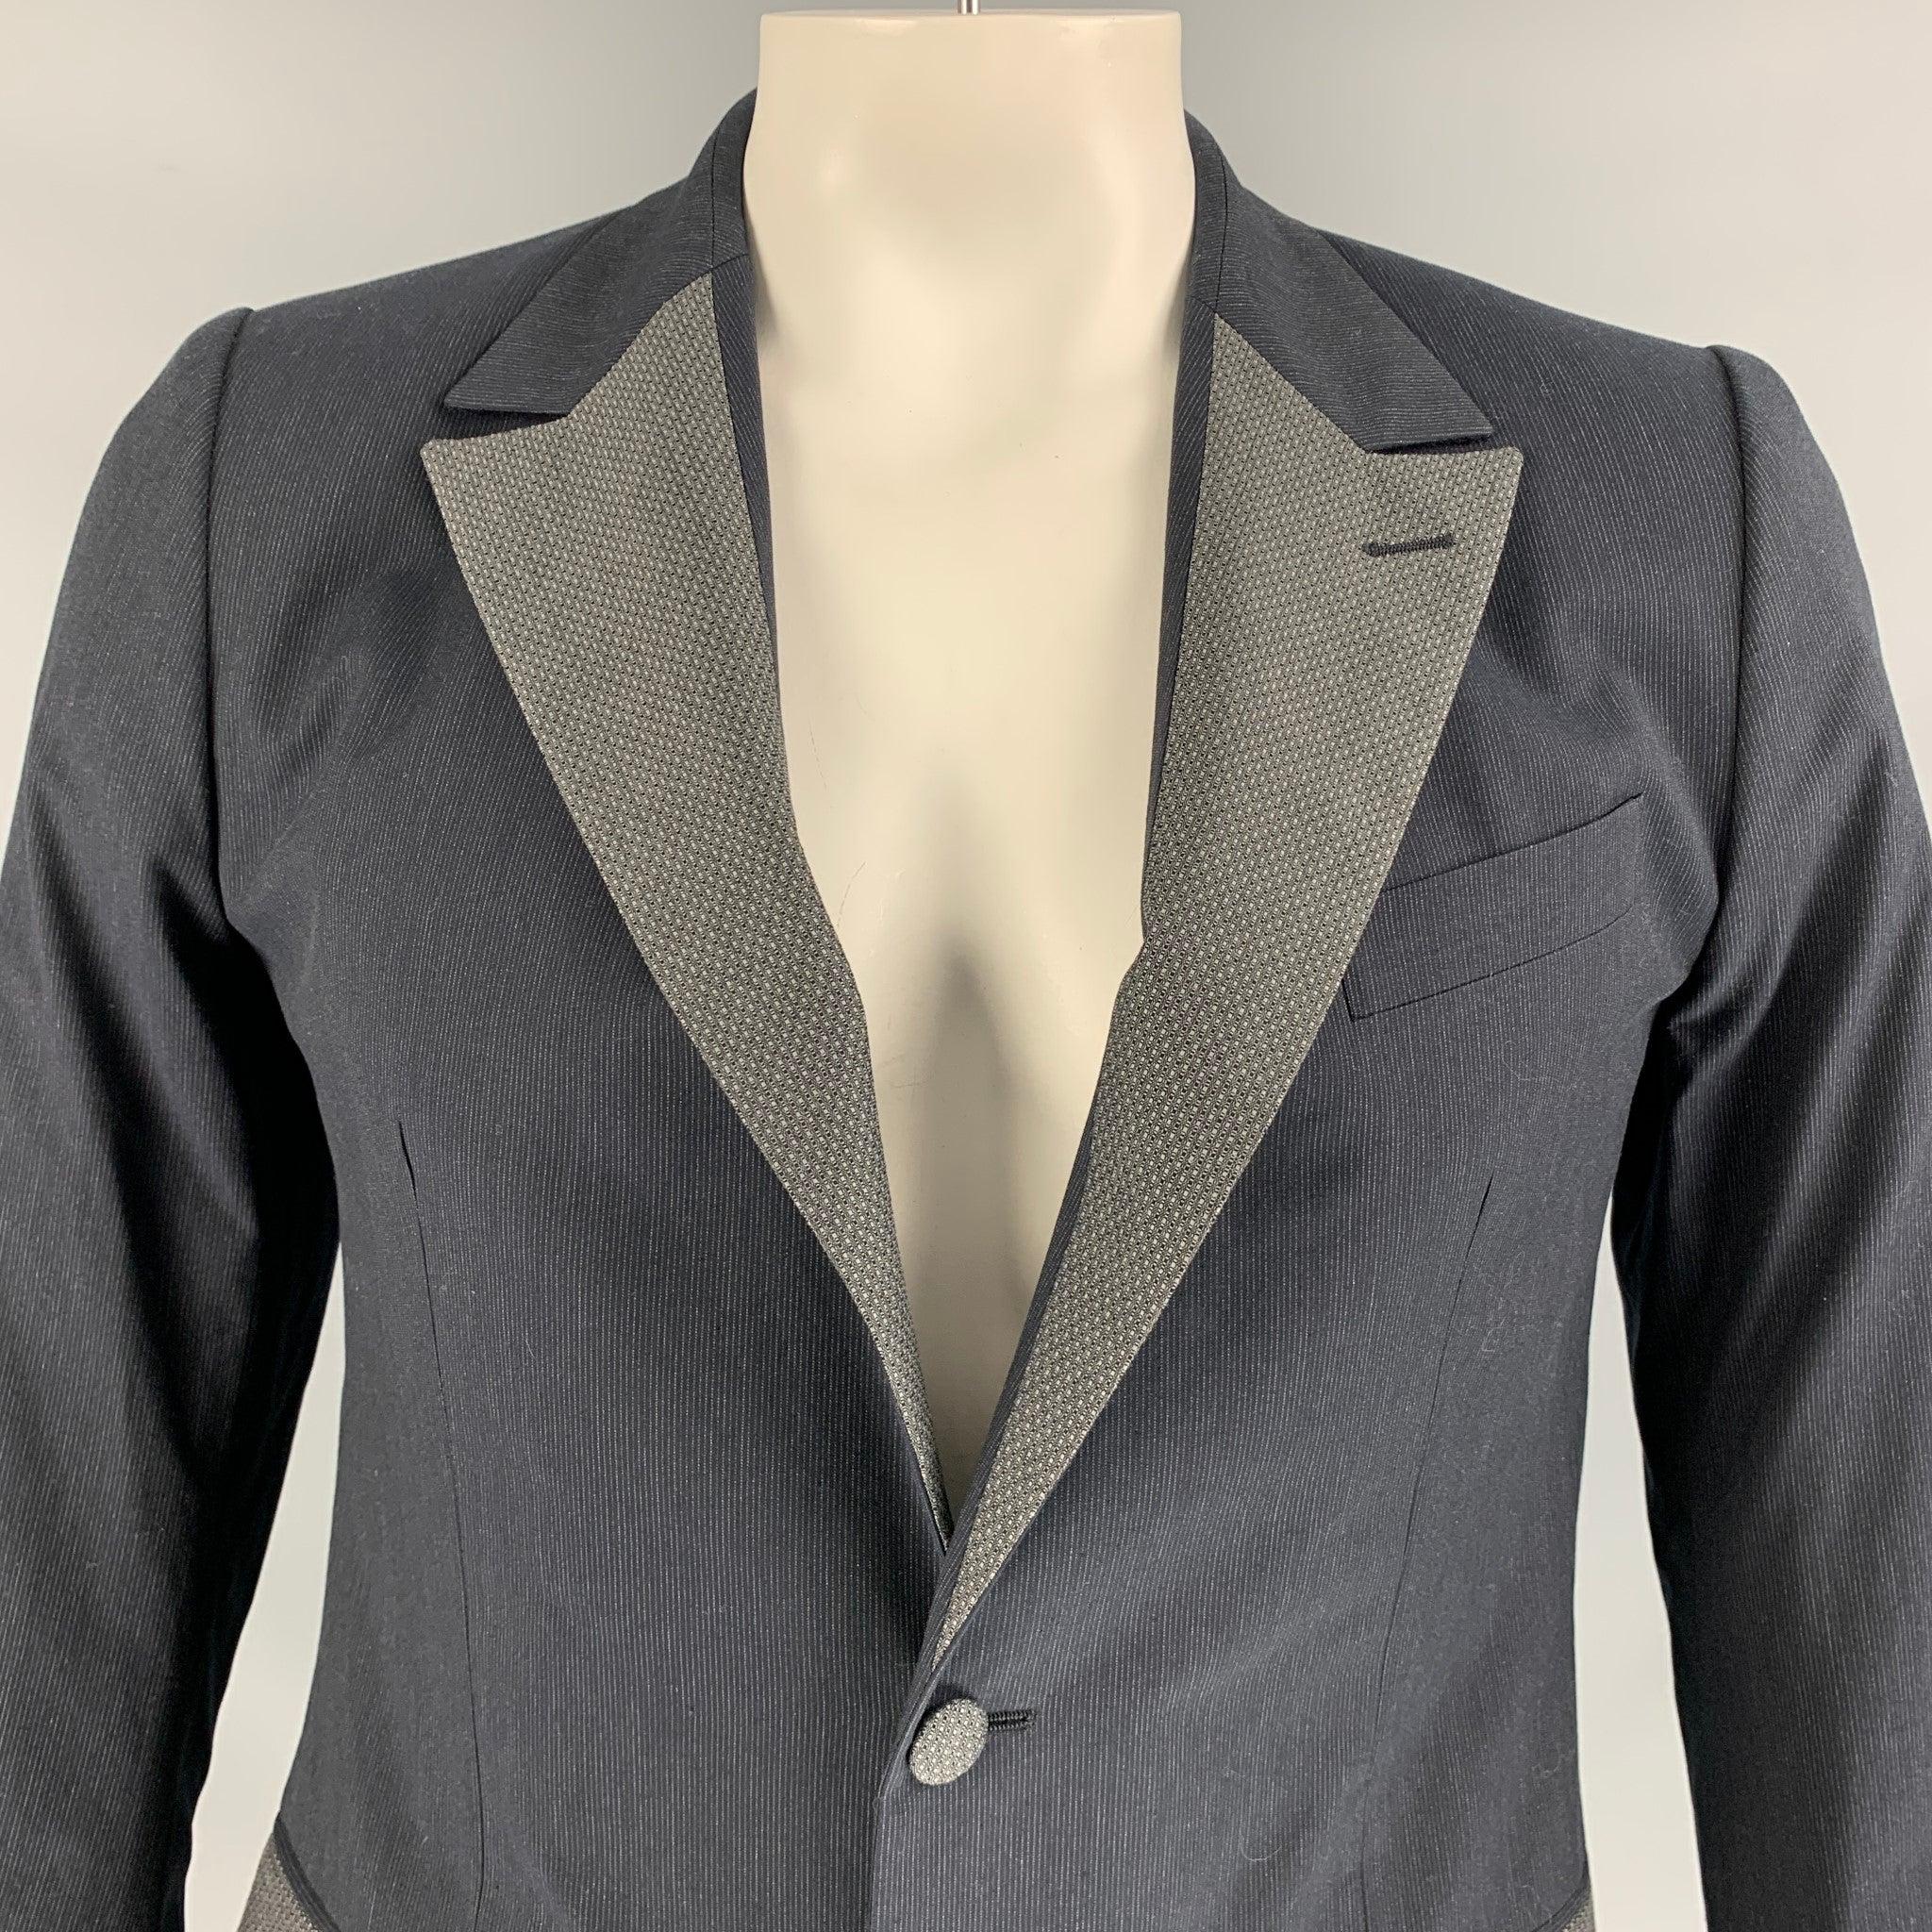 DOLCE & GABBANA long sleeve sport coat comes in charcoal cotton features a two button closure, straight flap pockets and a grey pinstripe notch lapel. Made in Italy. Excellent Pre-Owned Condition. 

Marked:   50 IT 

Measurements: 
 
Shoulder: 17